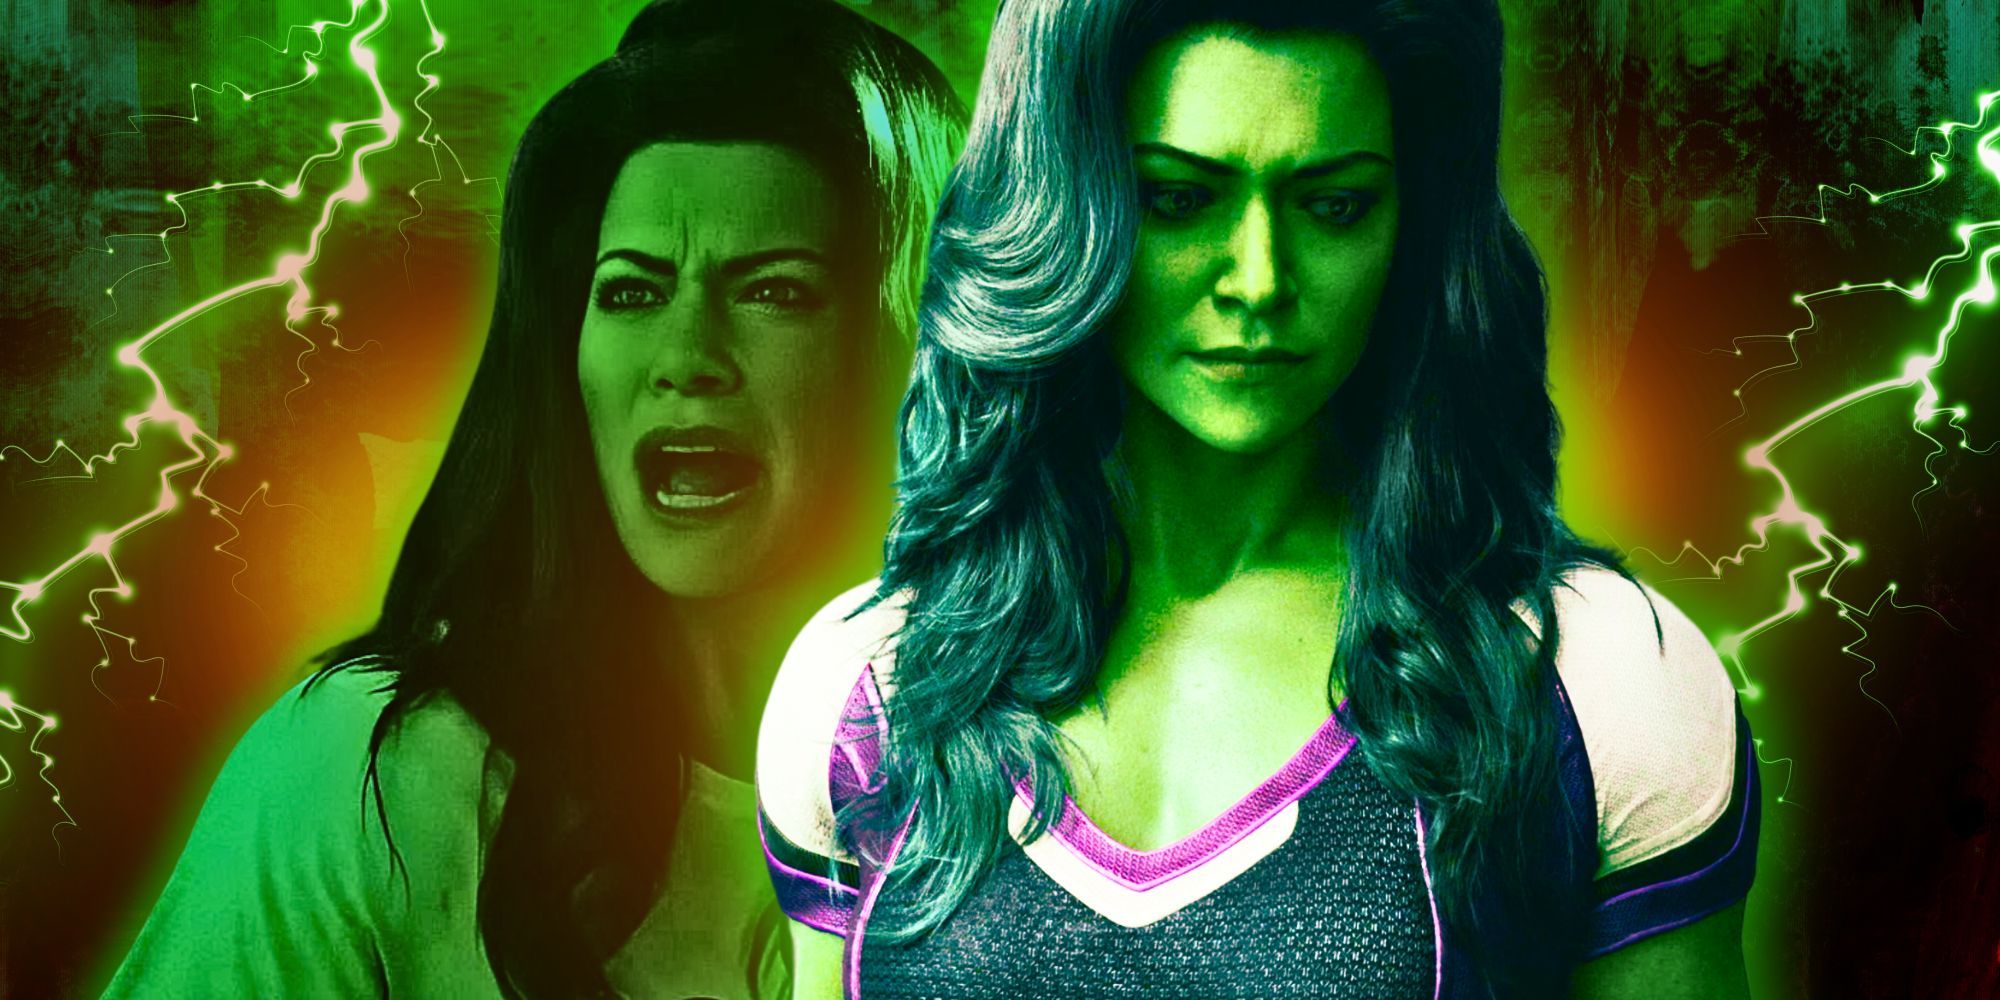 She-Hulk shouting in the MCU next to another image of She-Hulk scowling against a green background 